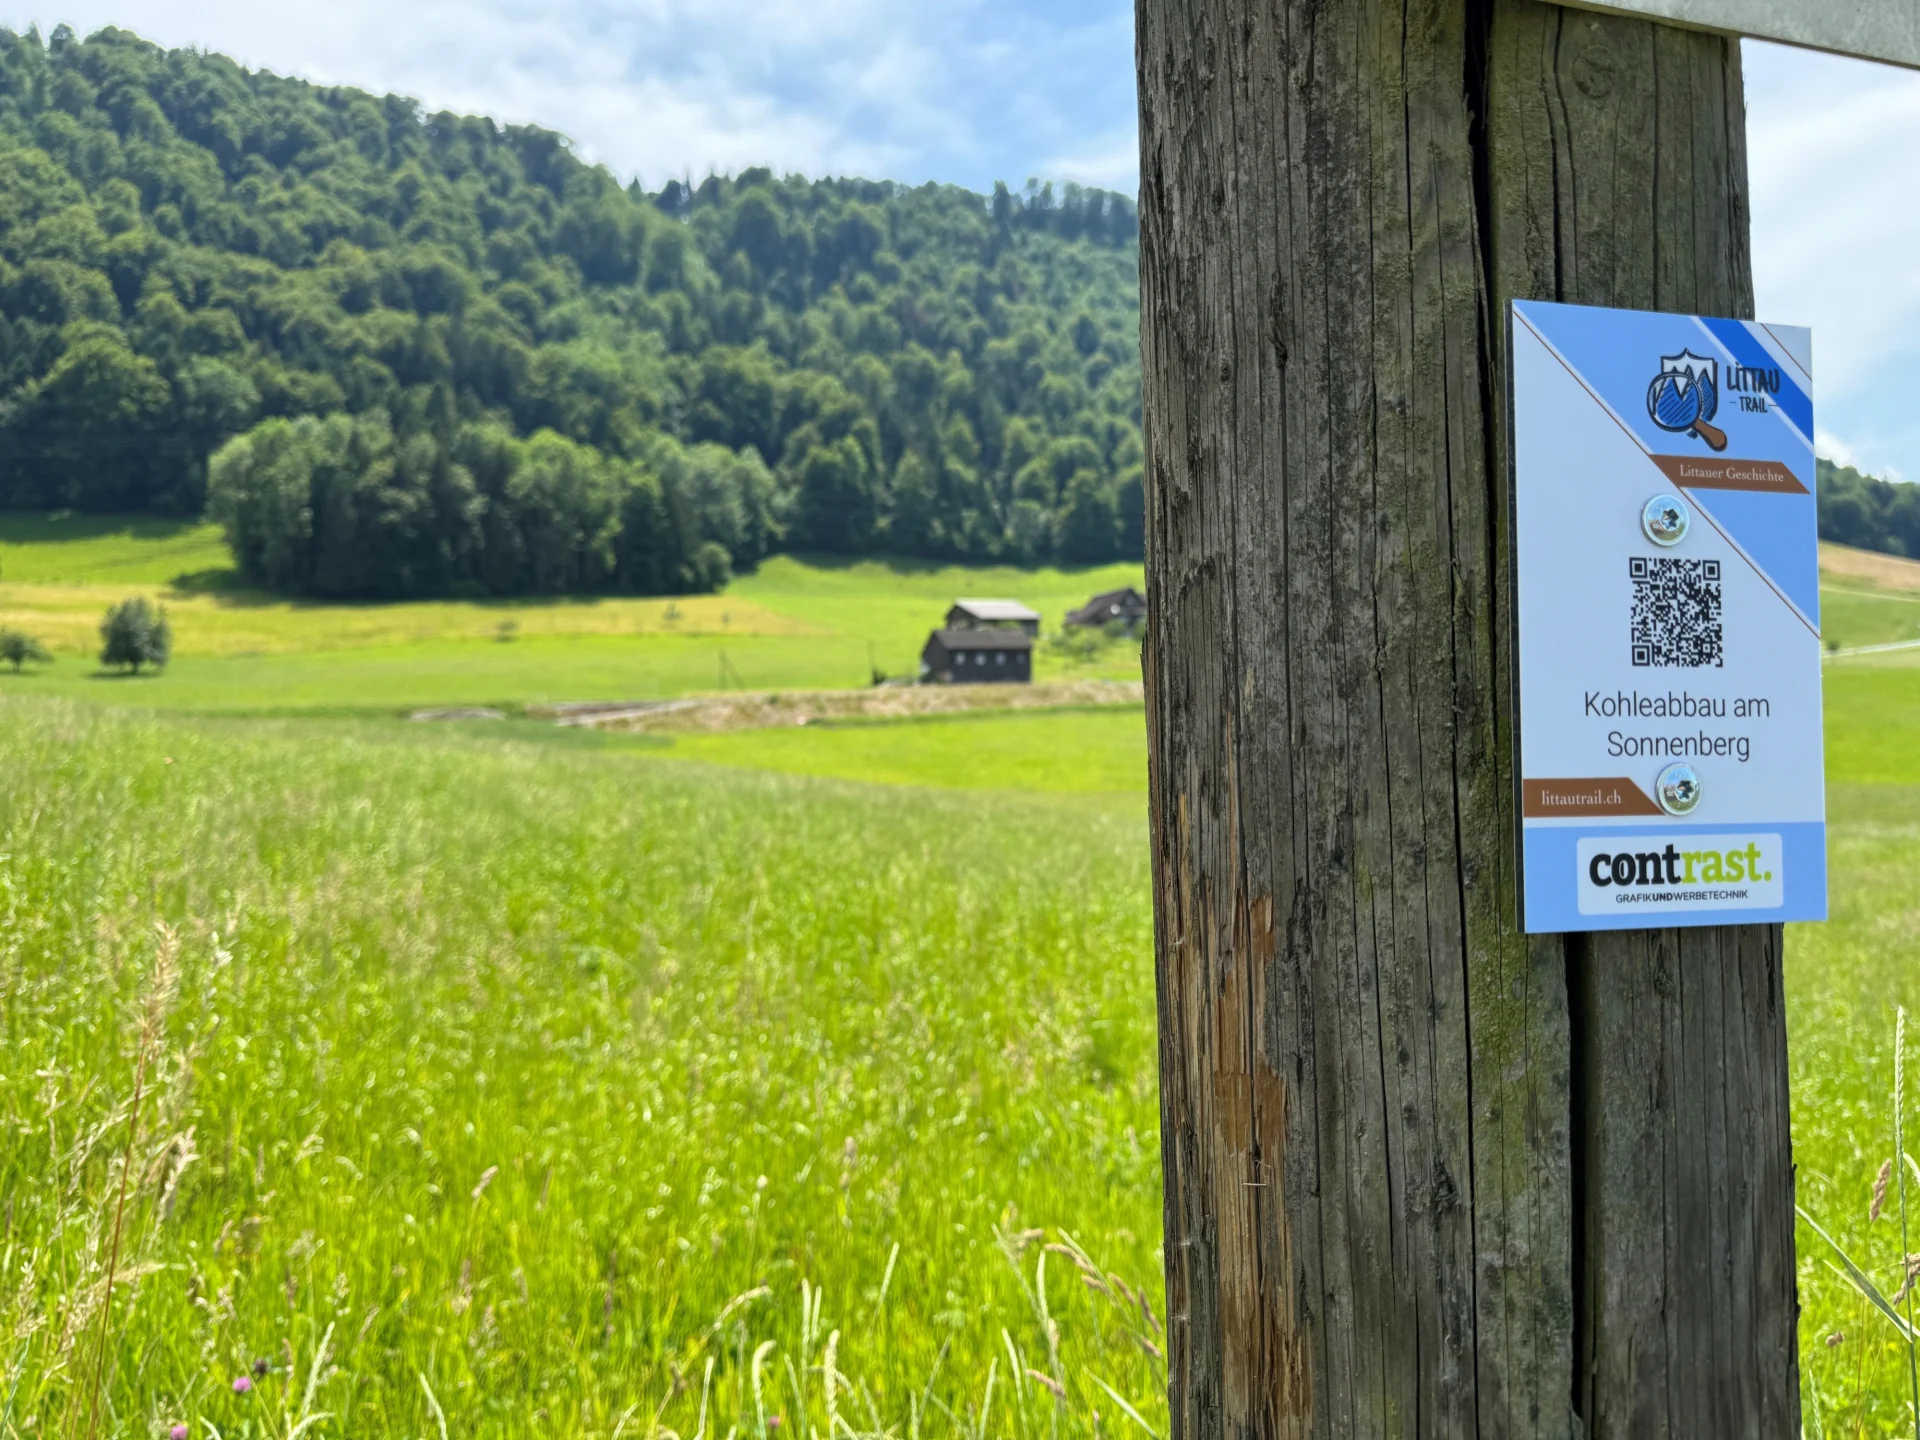 Thanks to the QR code, visitors can find out interesting information on the Littau Trail